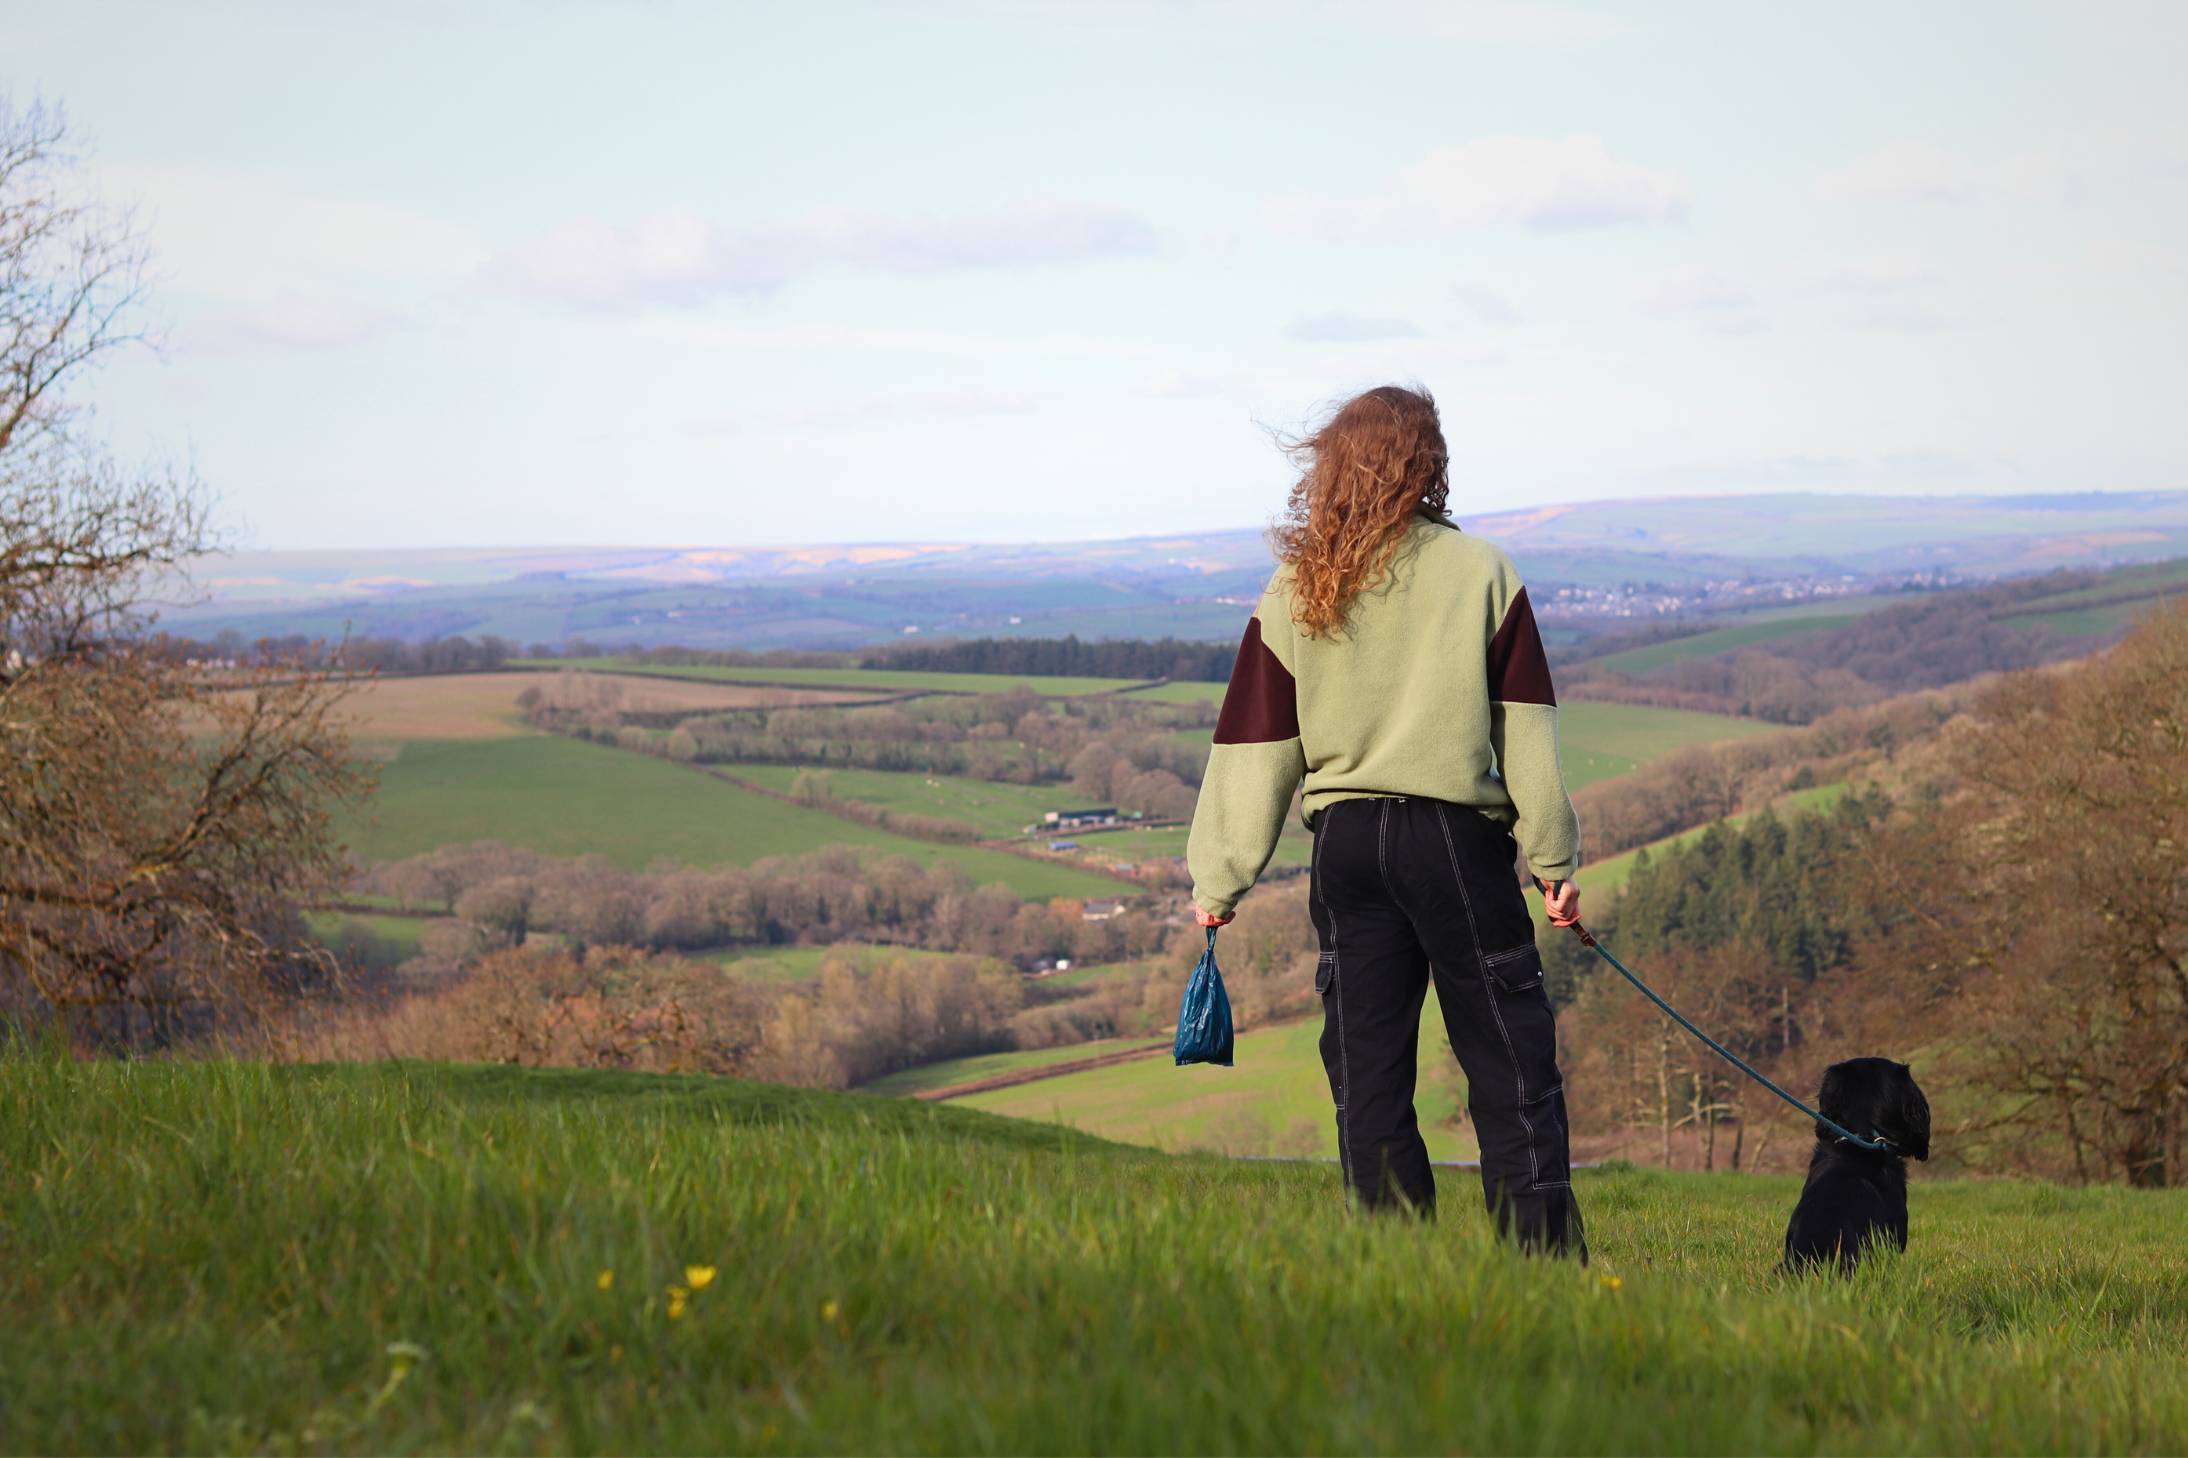 A photo of a woman and a dog looking out into the distance in a hilly, outdoor setting